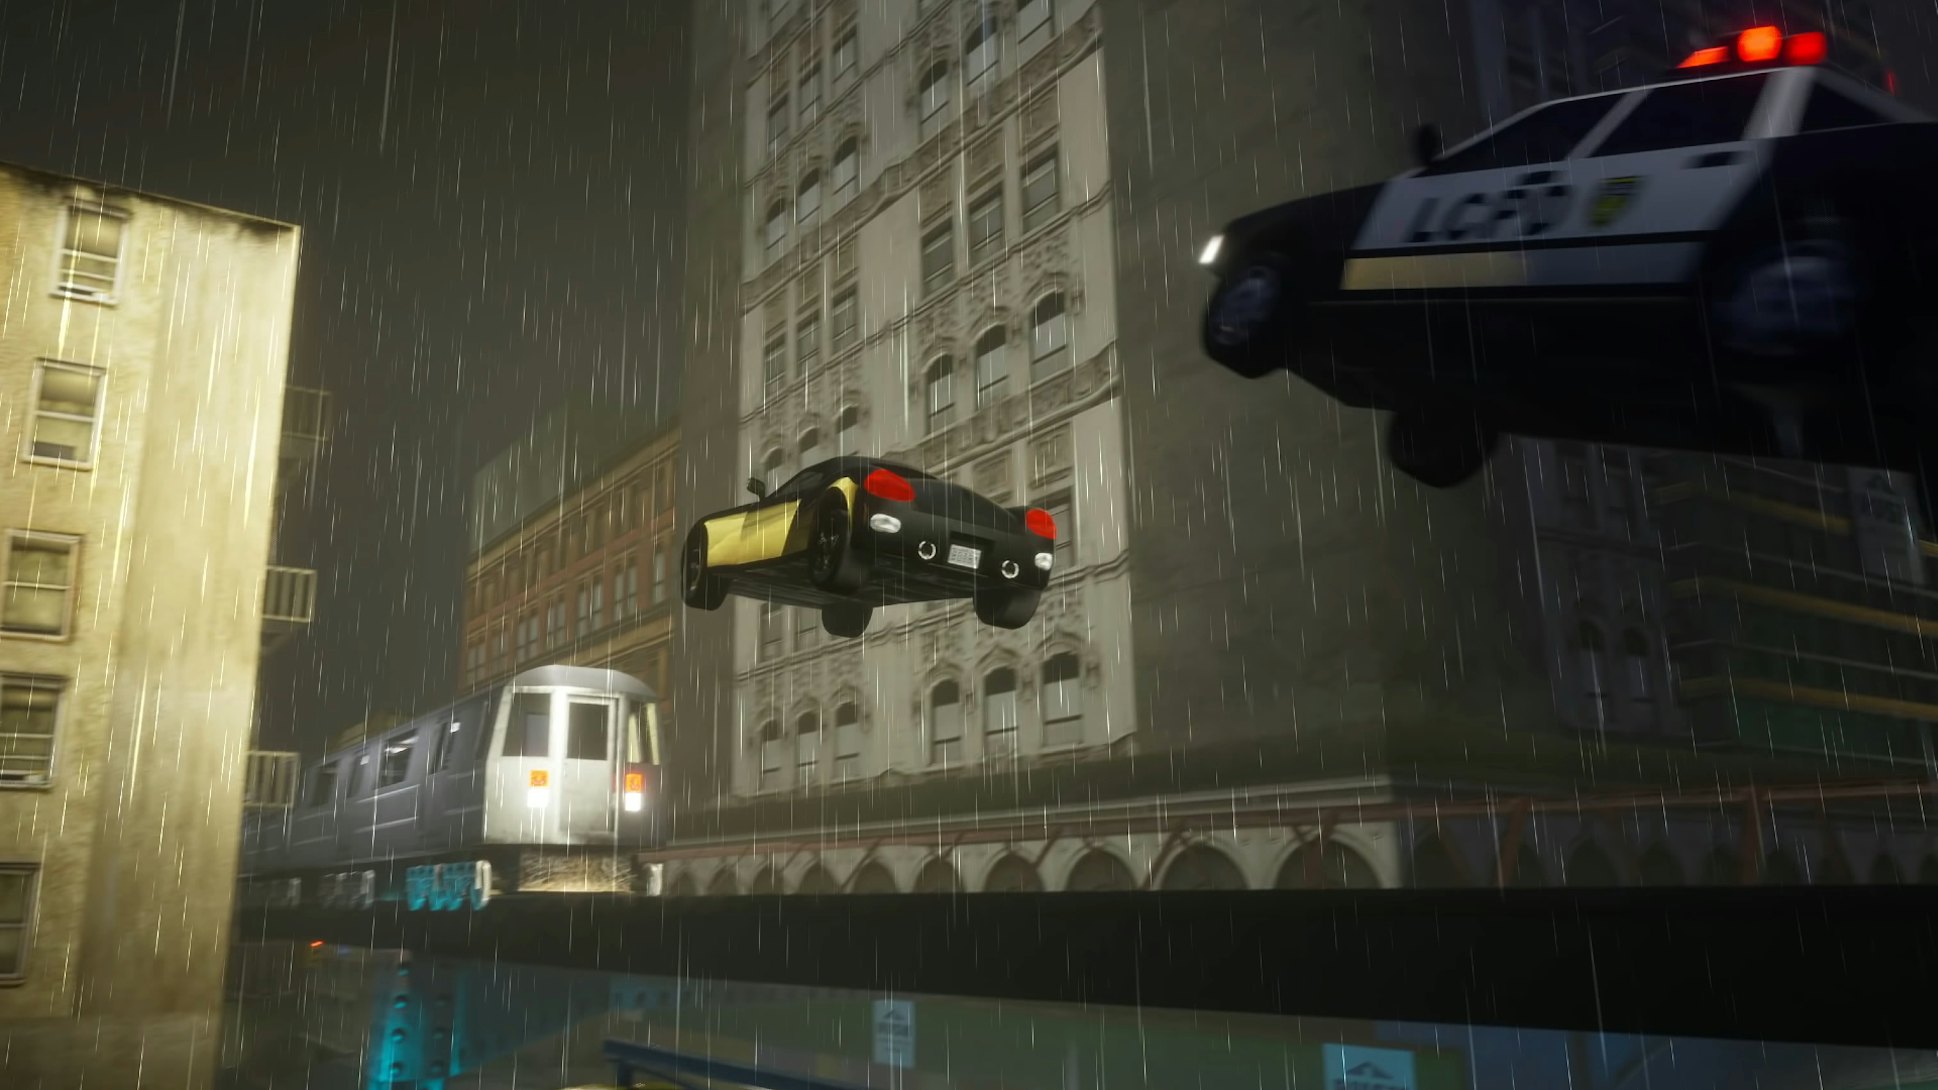 GTA: The Trilogy&#39; in 10 explosive images